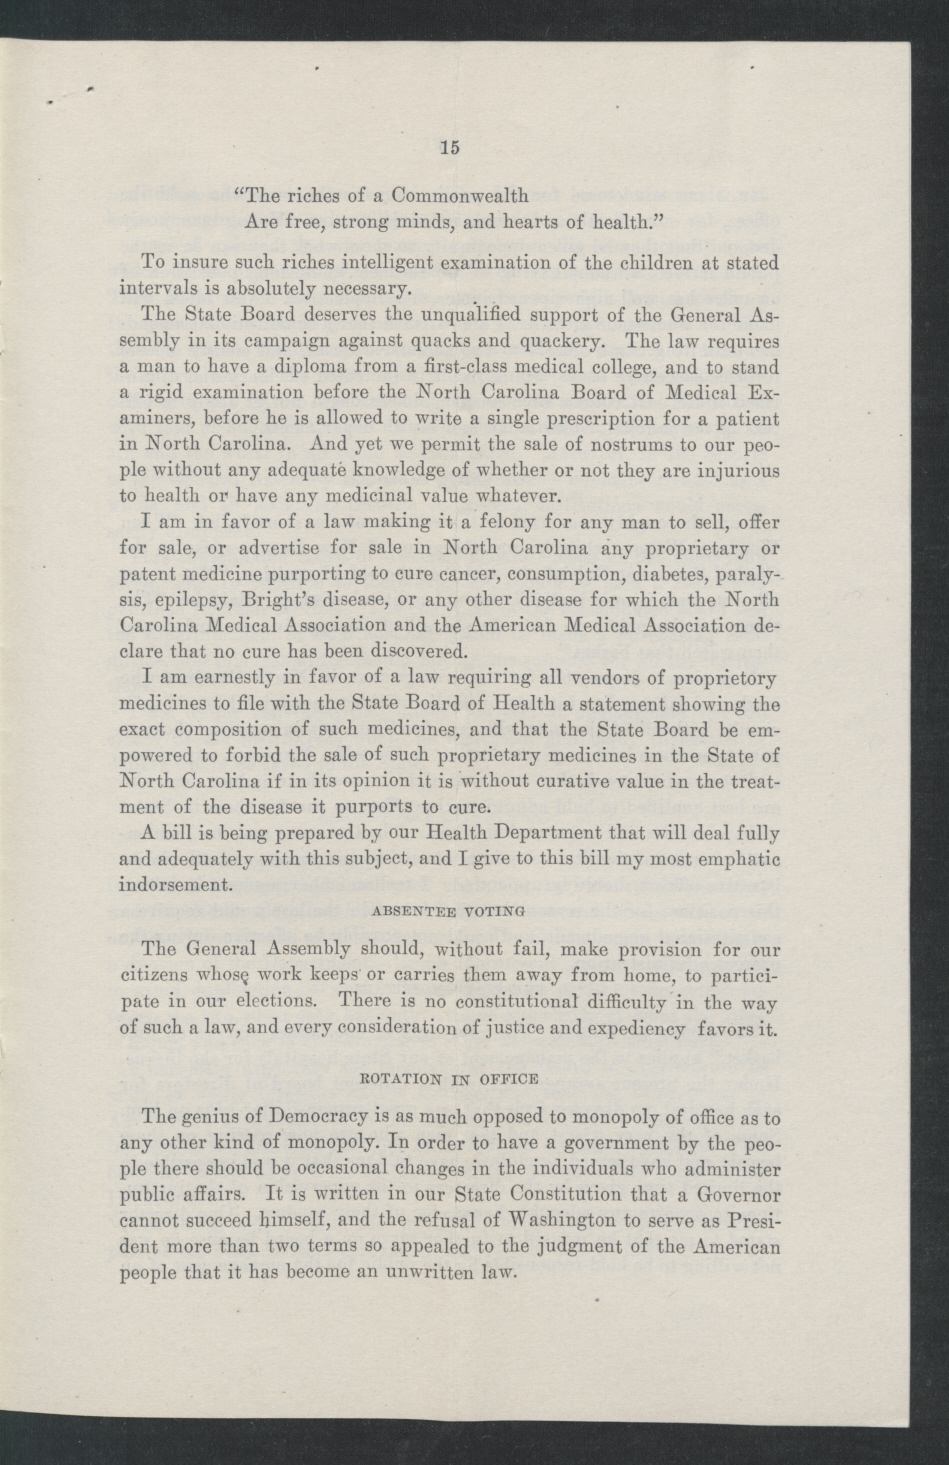 Inaugural Address of Governor Thomas W. Bickett to the General Assembly, January 11, 1917, page 13